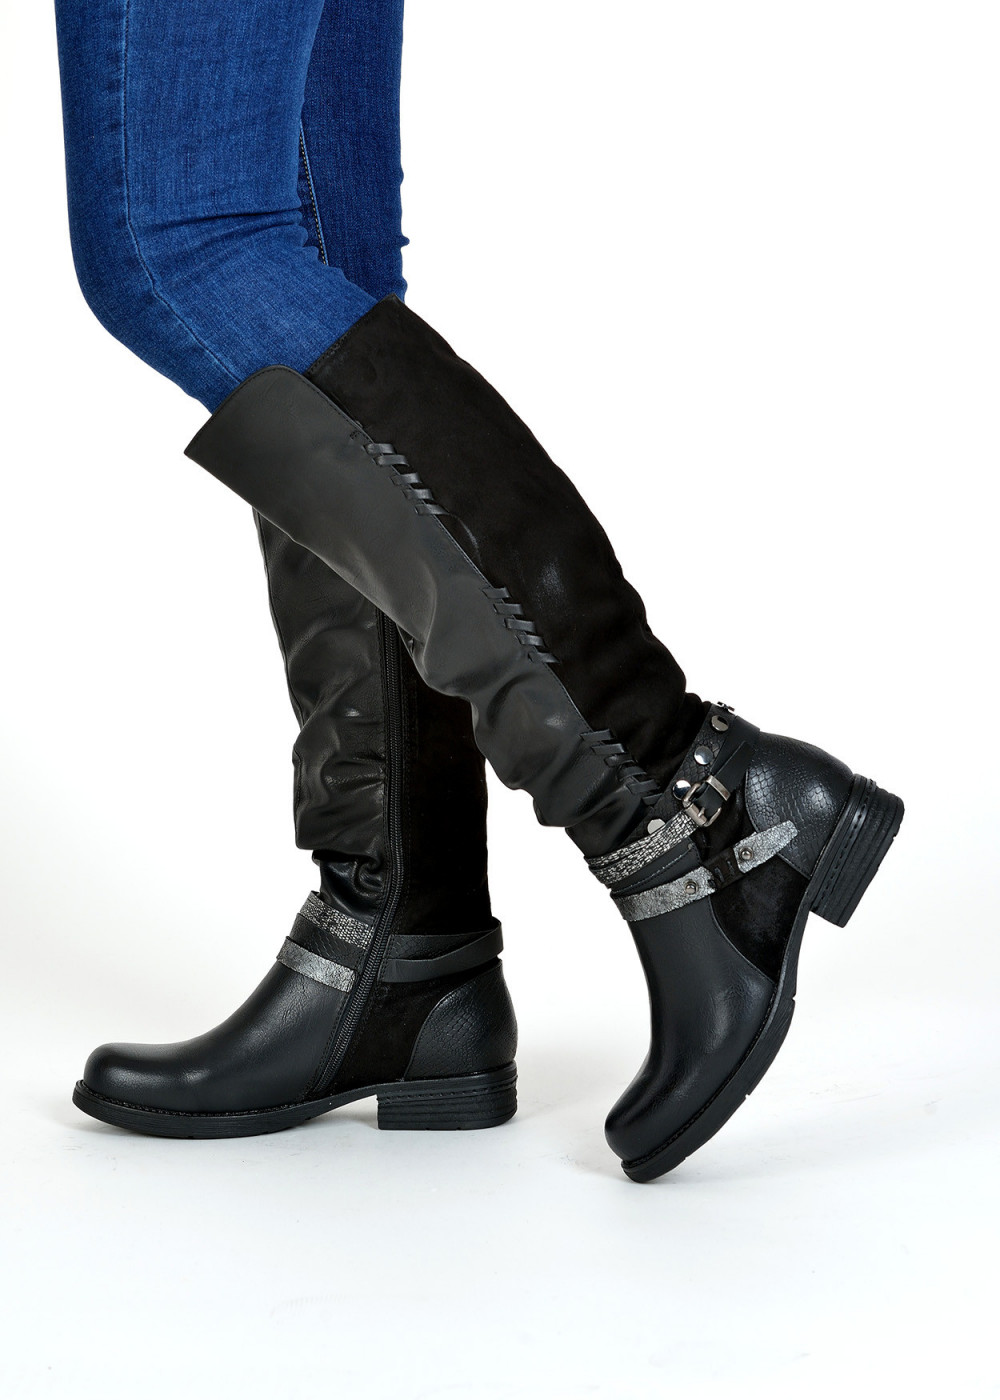 Black rustic strap detailed knee high boots 3